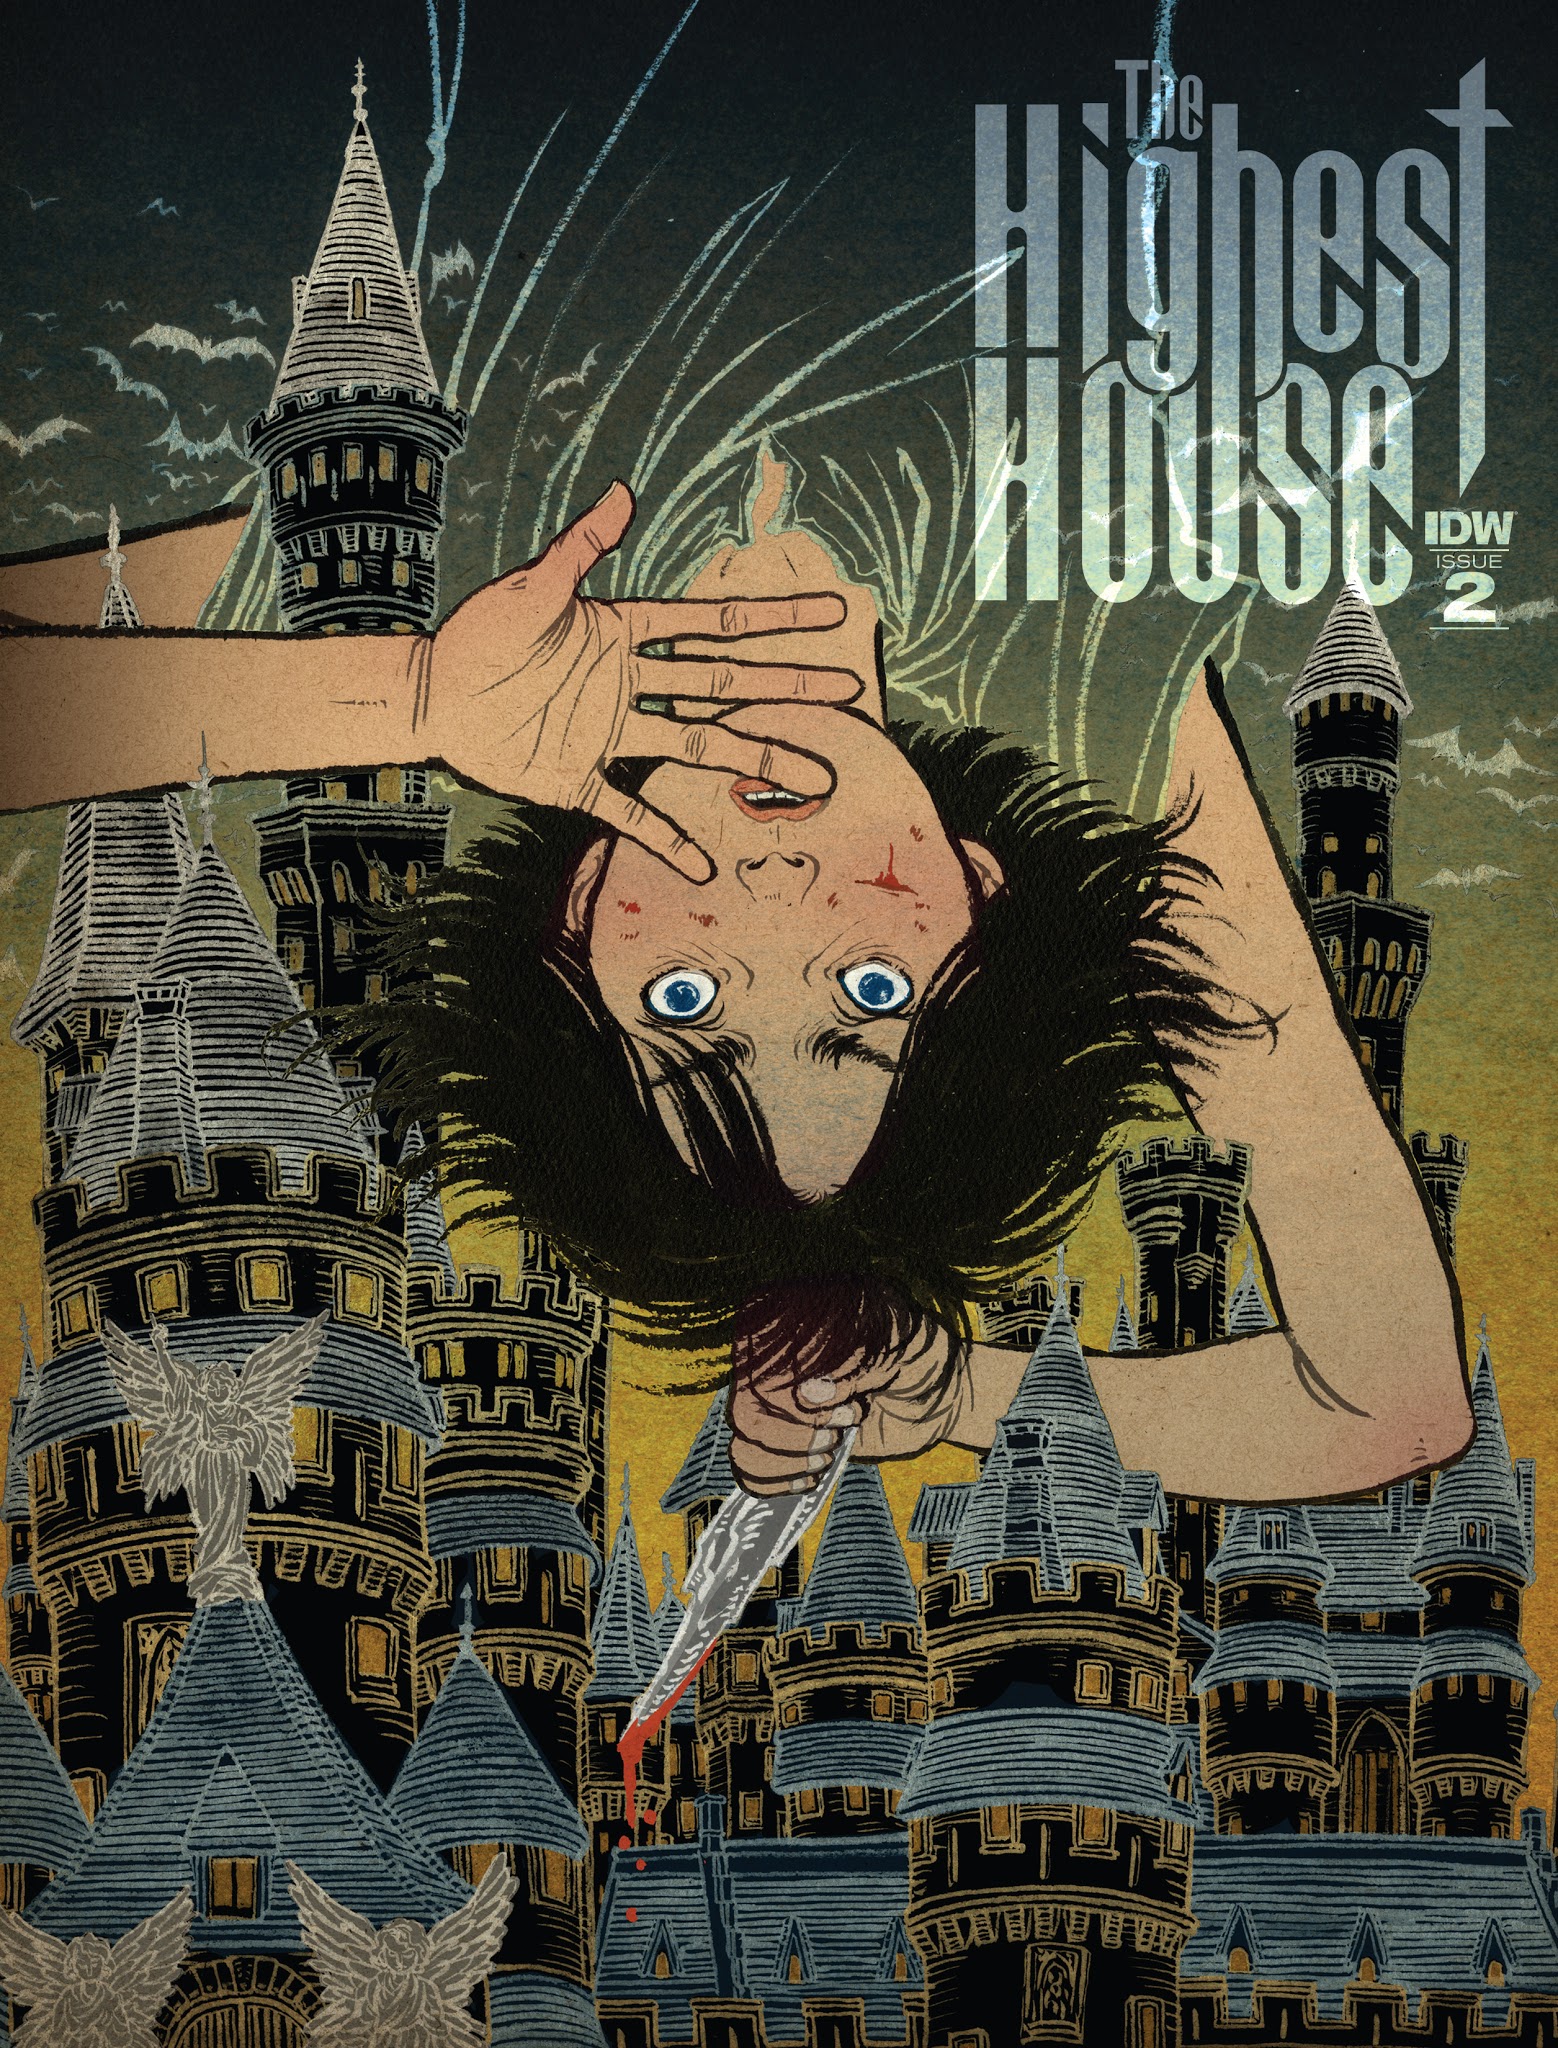 Read online The Highest House comic -  Issue #2 - 1